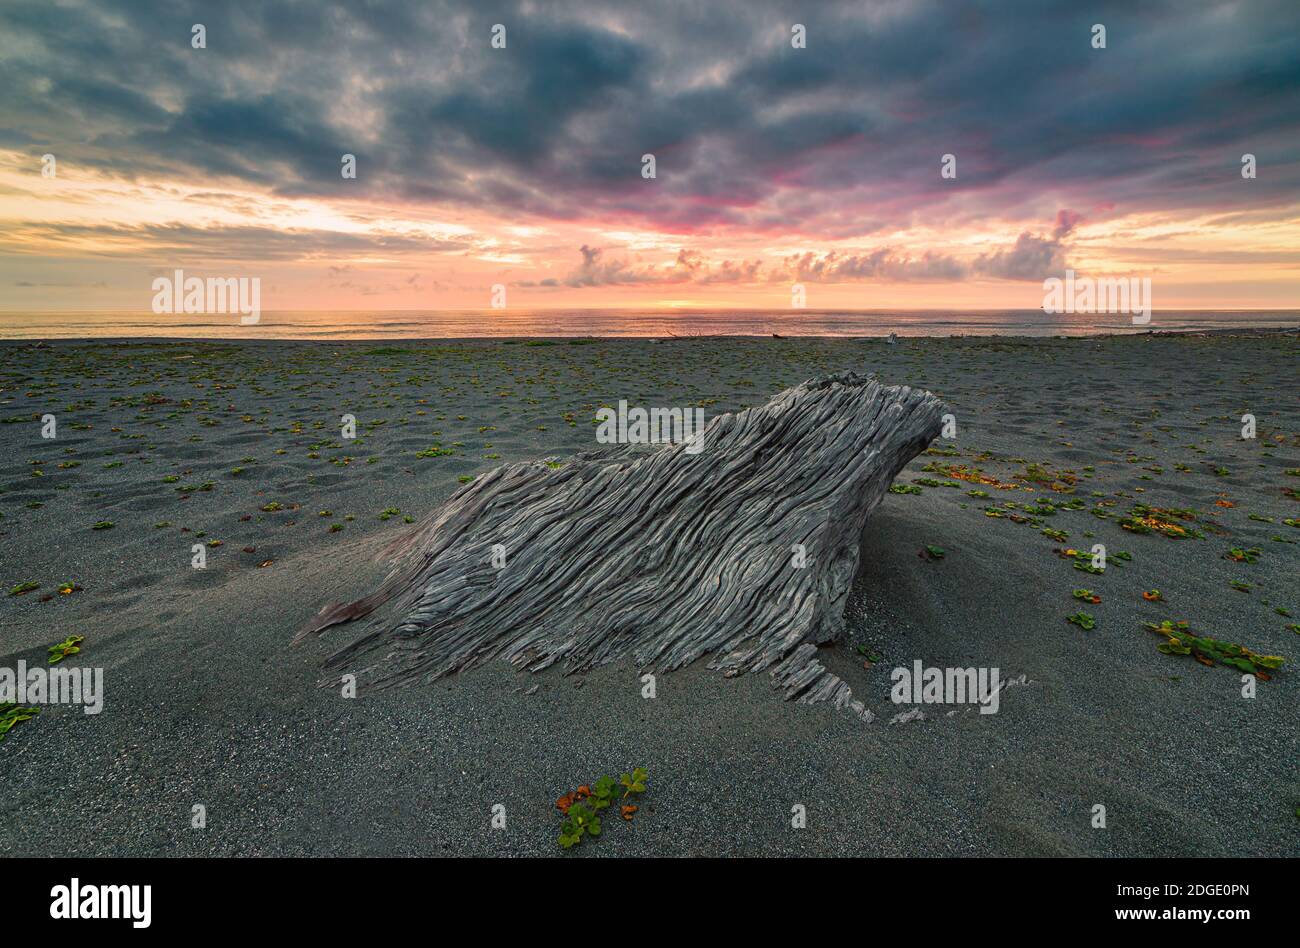 Driftwood Buried in the Sand under a Dramatic Sunset at the Beach, Farbbild Stockfoto